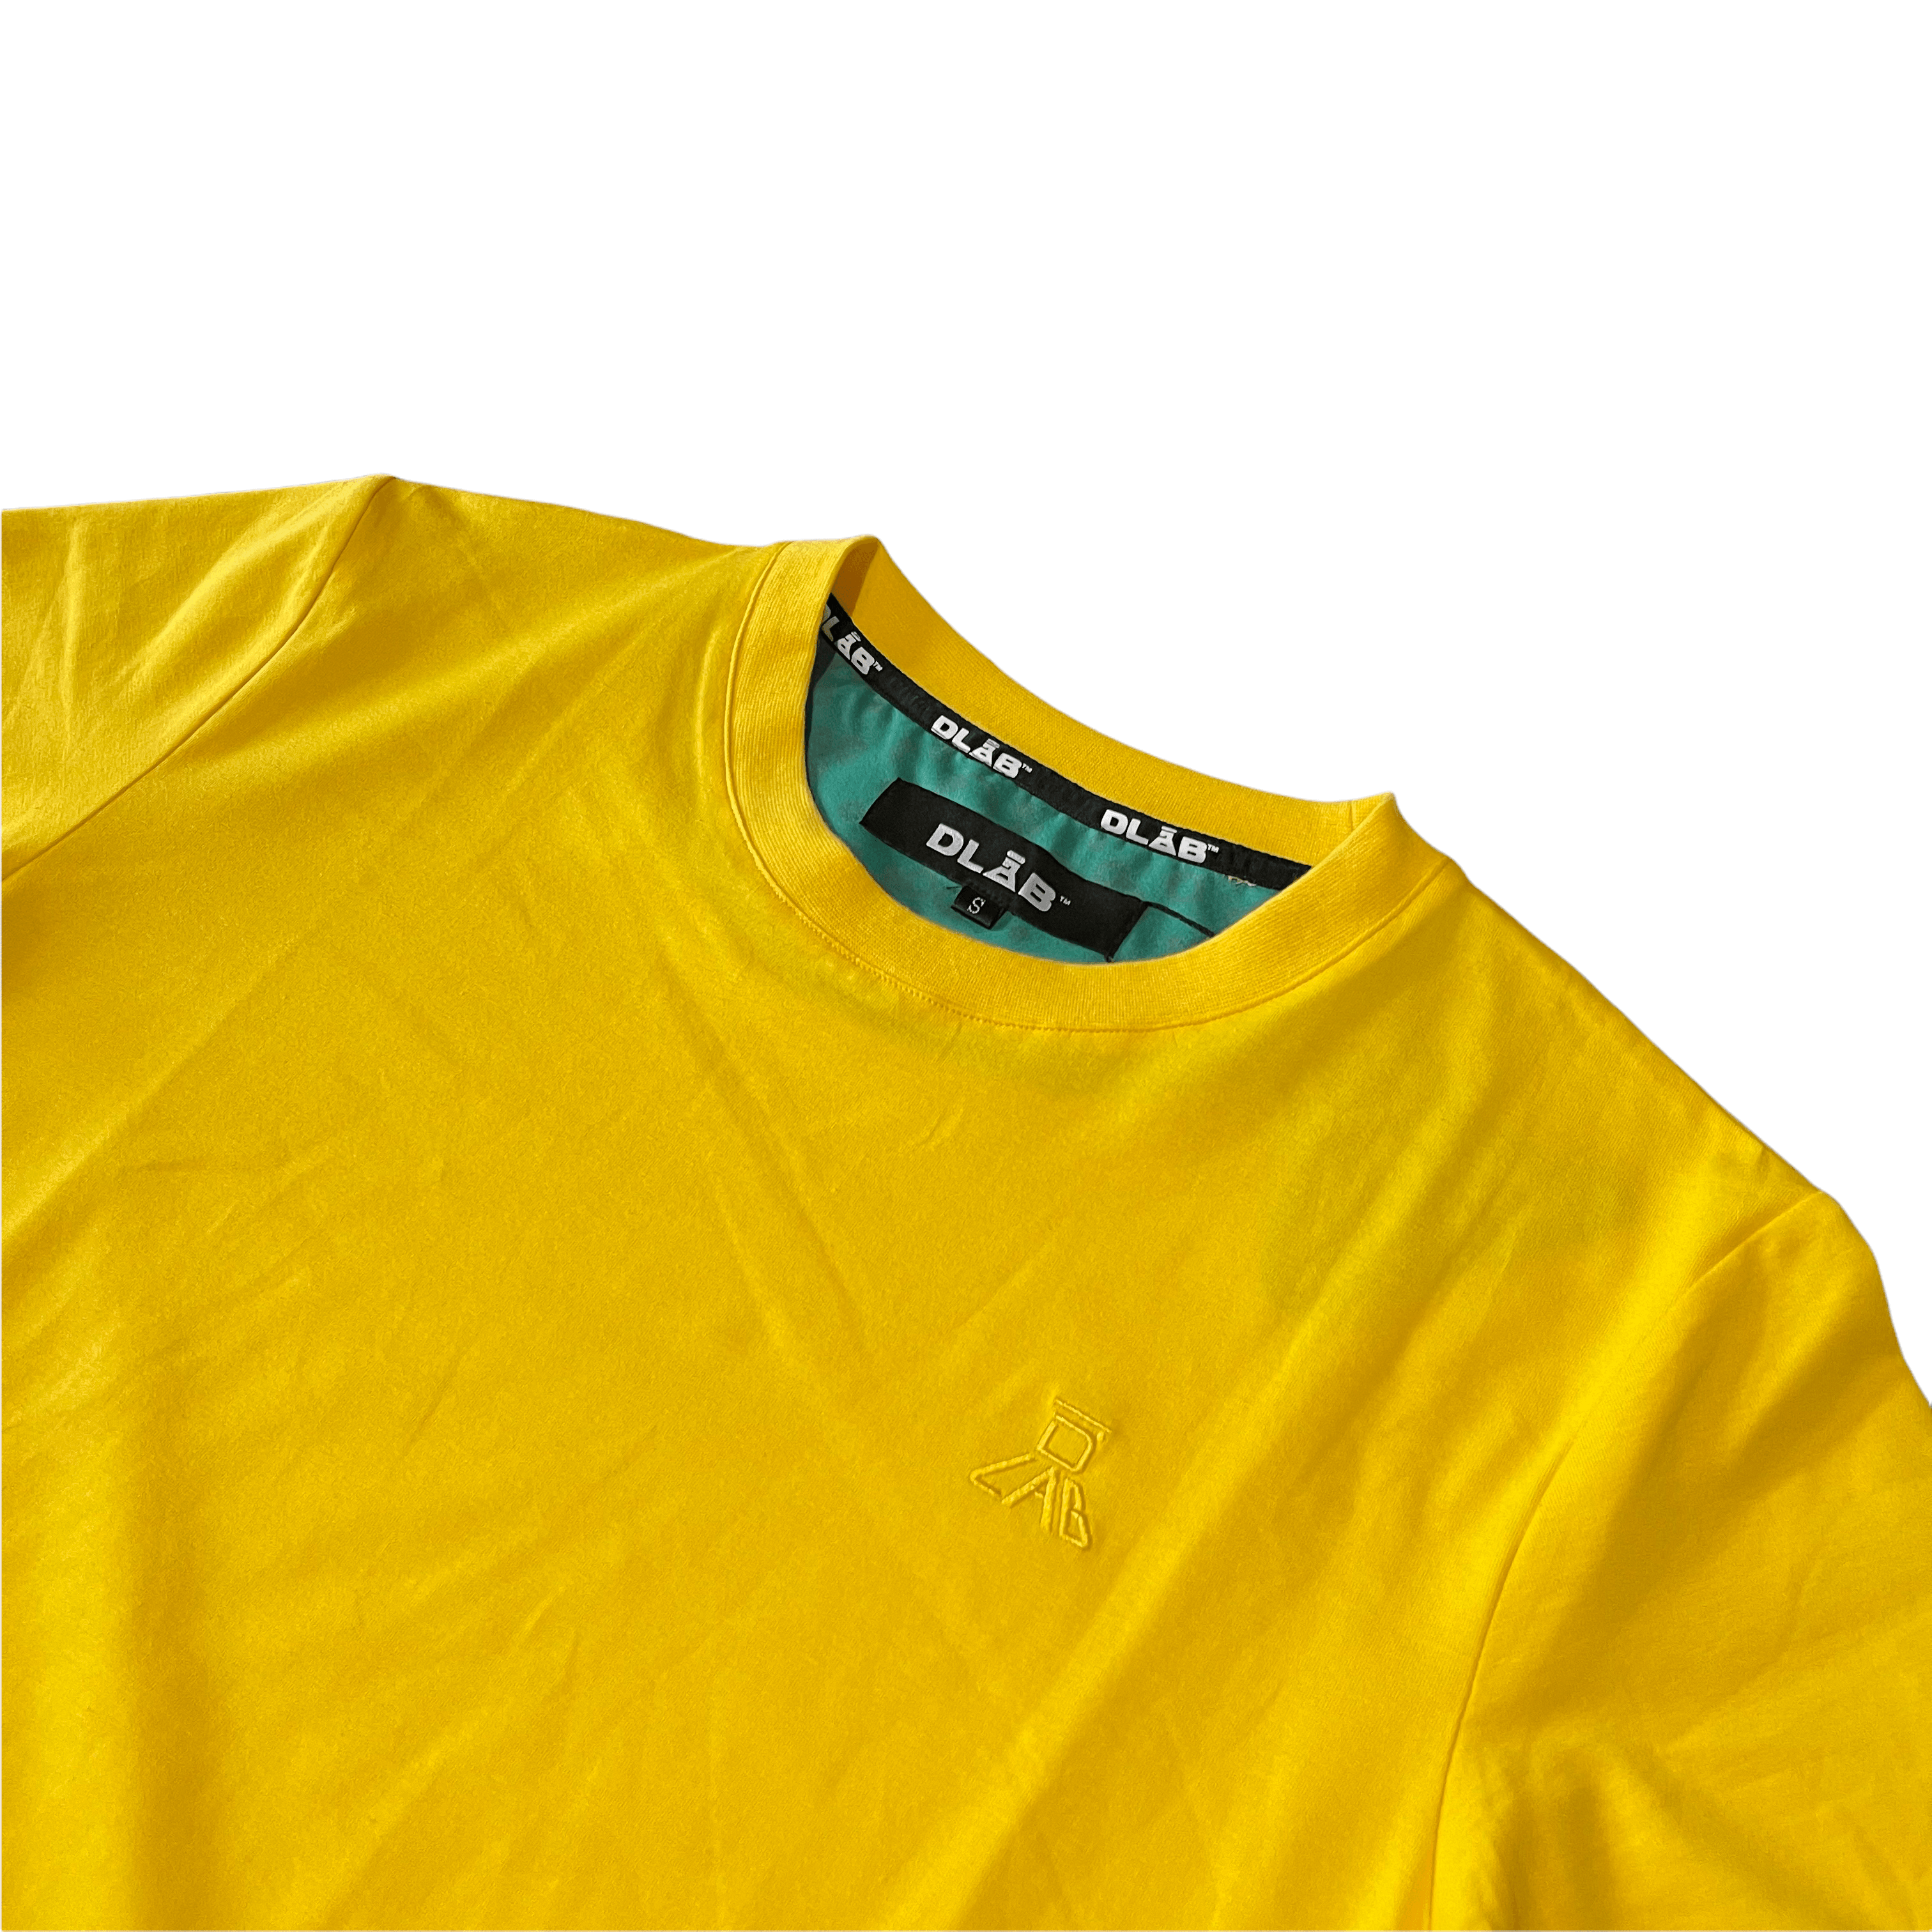 Dlab Essentials Yellow on YEllow Tee - DlabStore